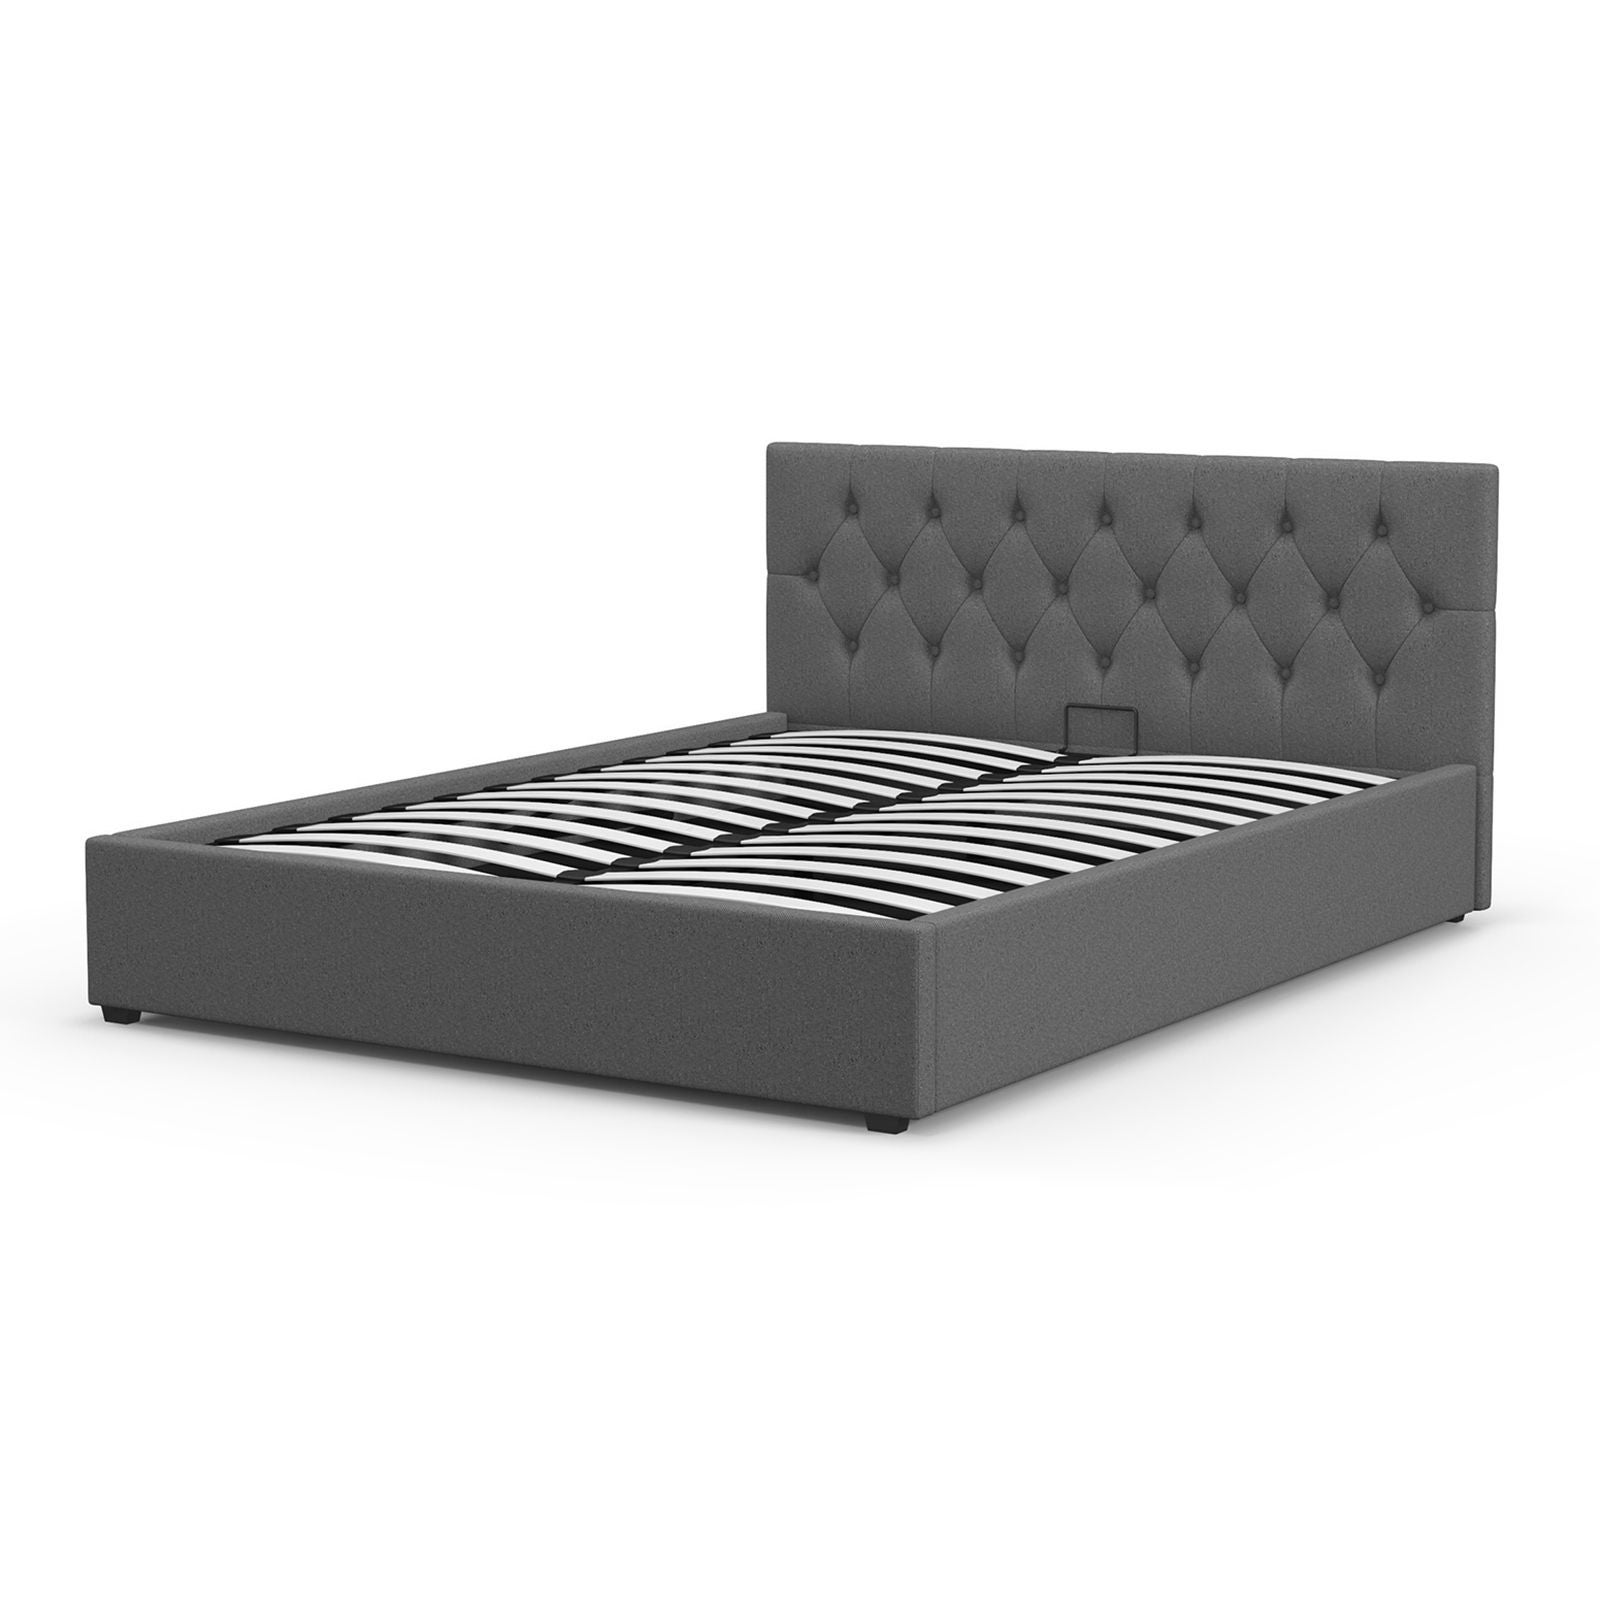 Milano Capri Luxury Gas Lift Bed Frame Base And Headboard With Storage All Sizes